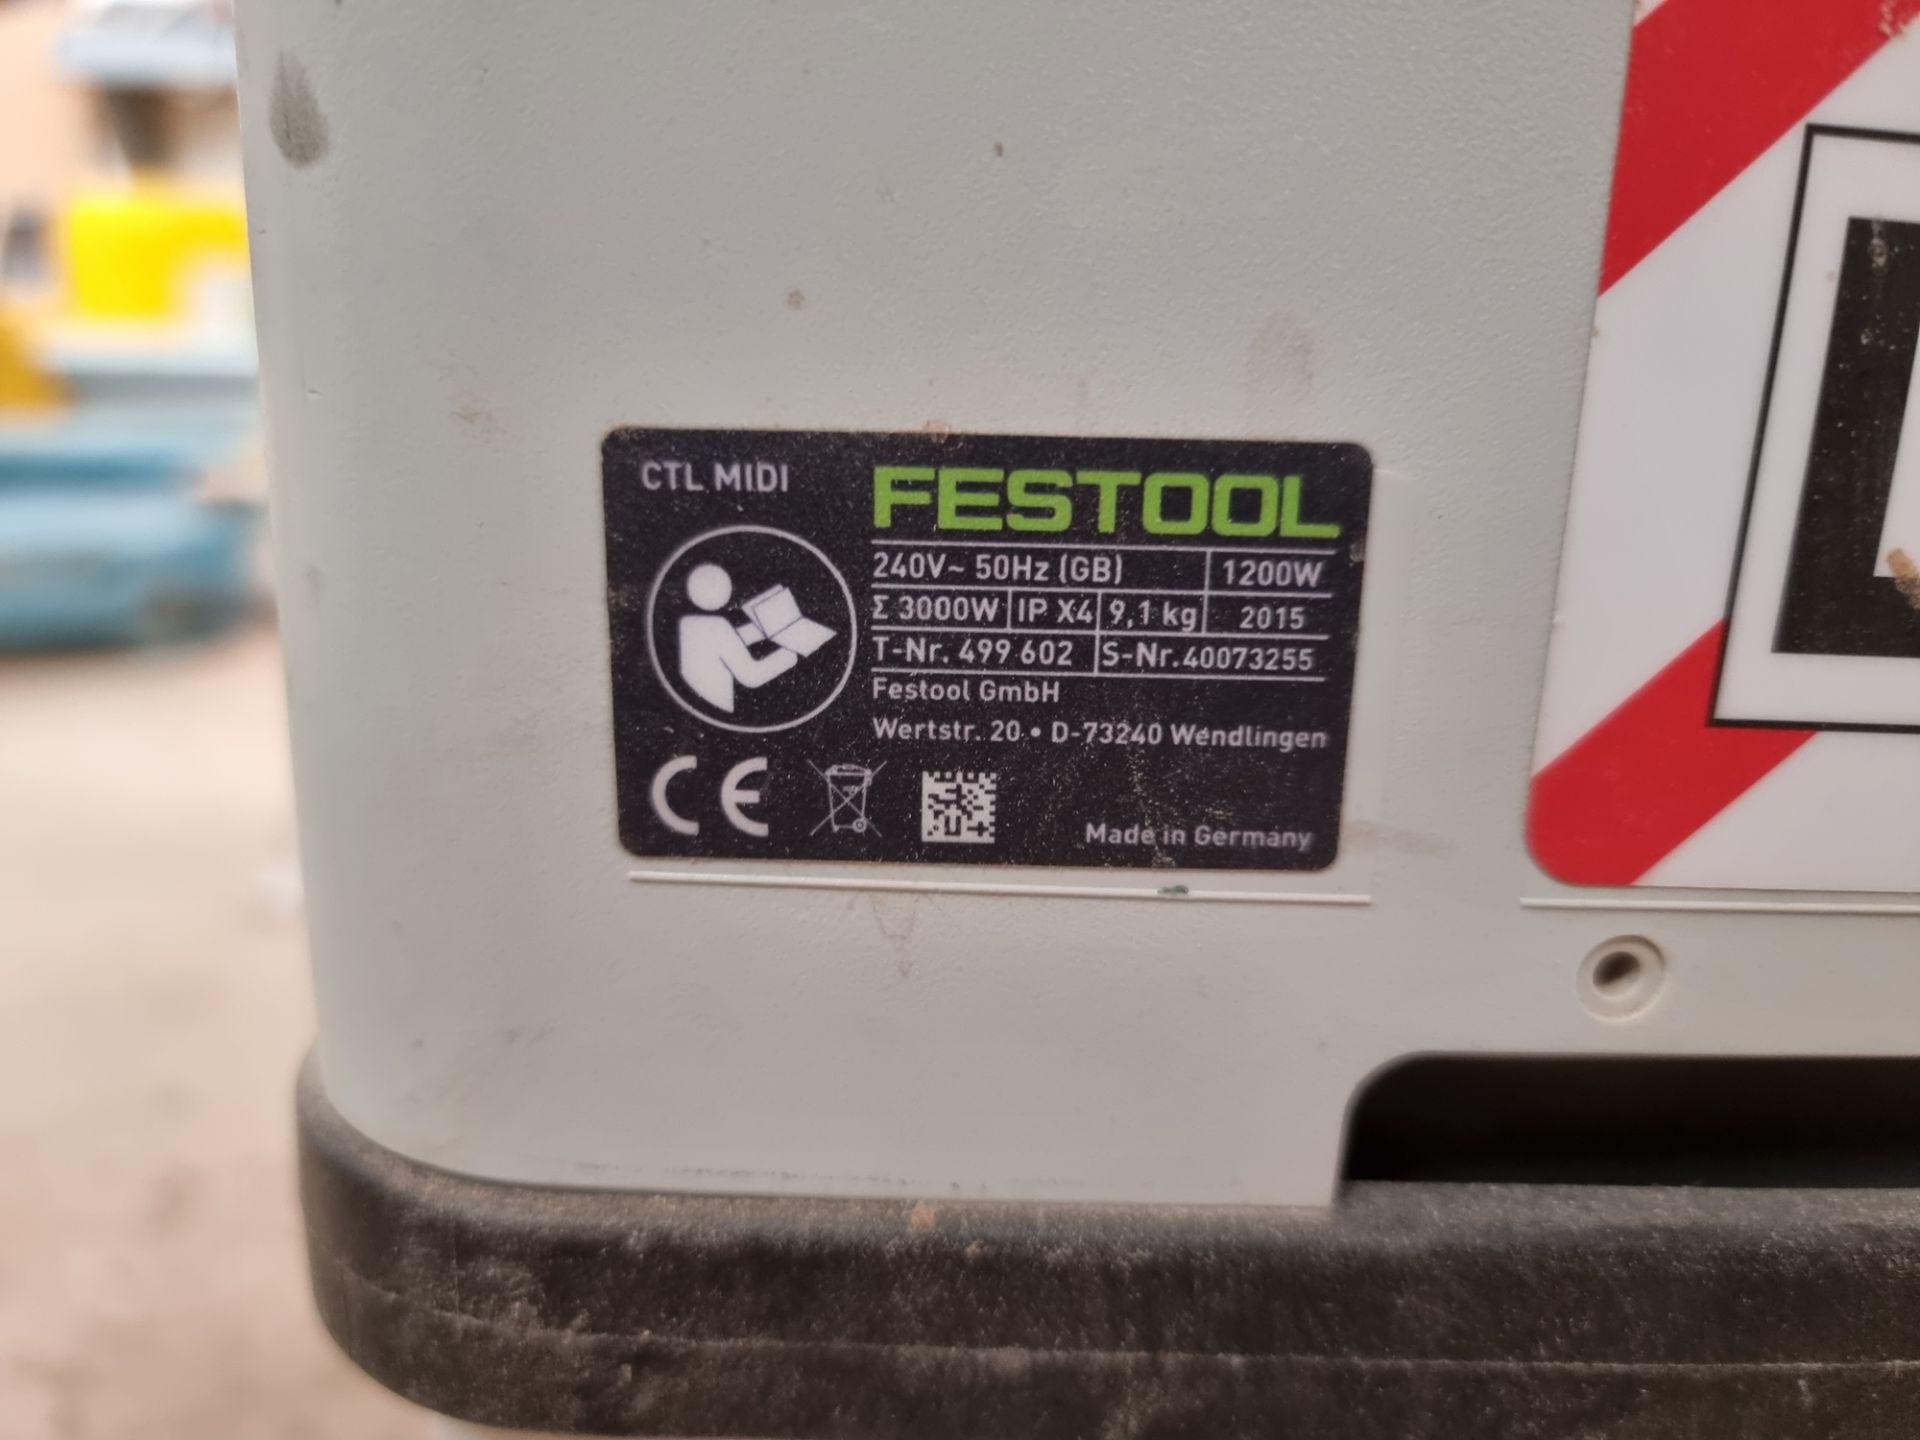 1: Festool CTL Midi Mobile Dust Extractor, Serial Number: 40073255, Year of Manufacture: 2015 - Image 3 of 5